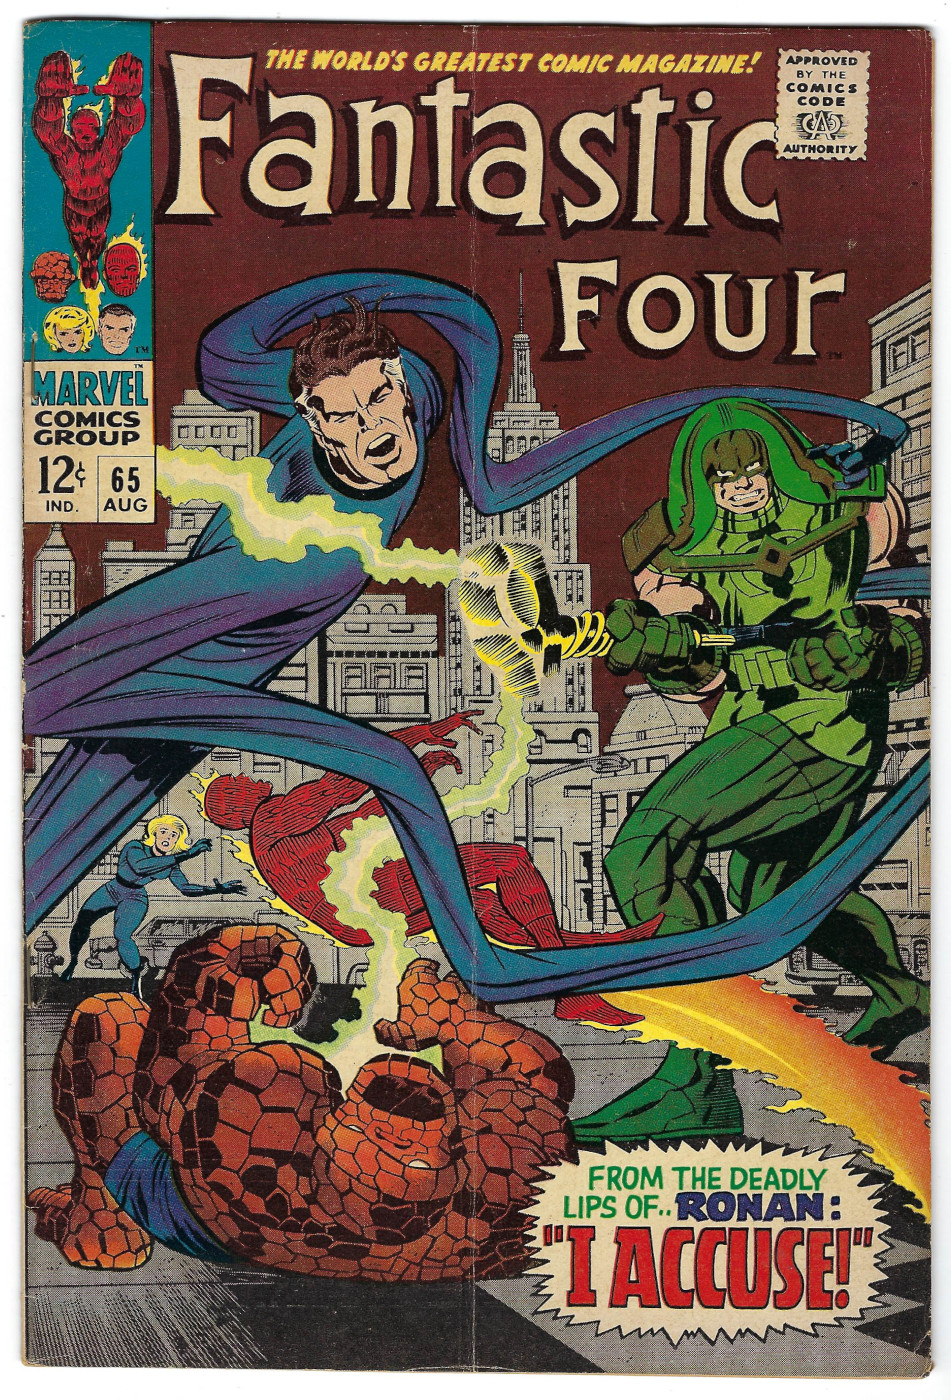 Marvel Comics Fantastic Four (1961) #65: 1st Appearance of Ronan the Accuser 1